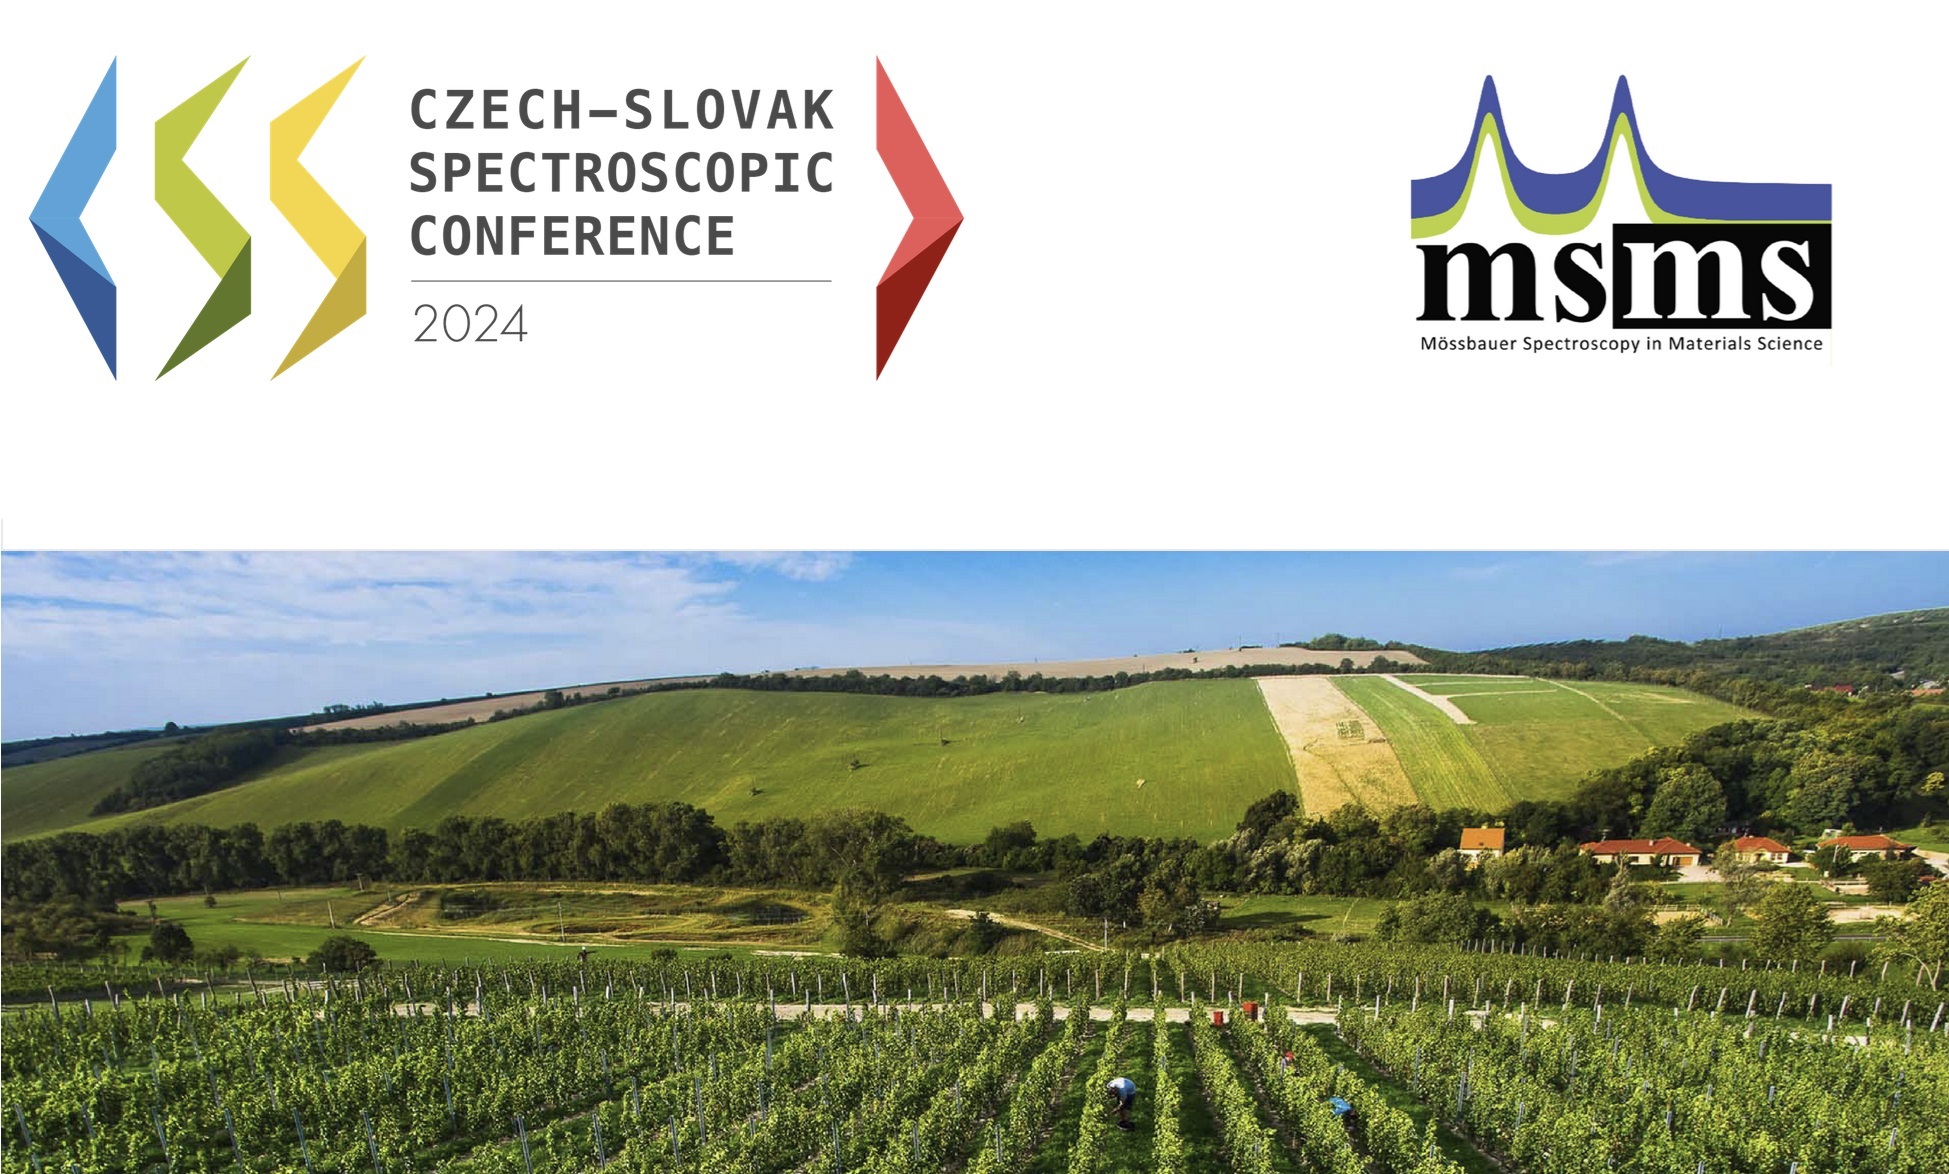 **Photo**: CSSC & MSMS 2024: 18th Czech - Slovak Spectroscopic Conference (CSSC) & Mössbauer Spectroscopy in Materials Science (MSMS)